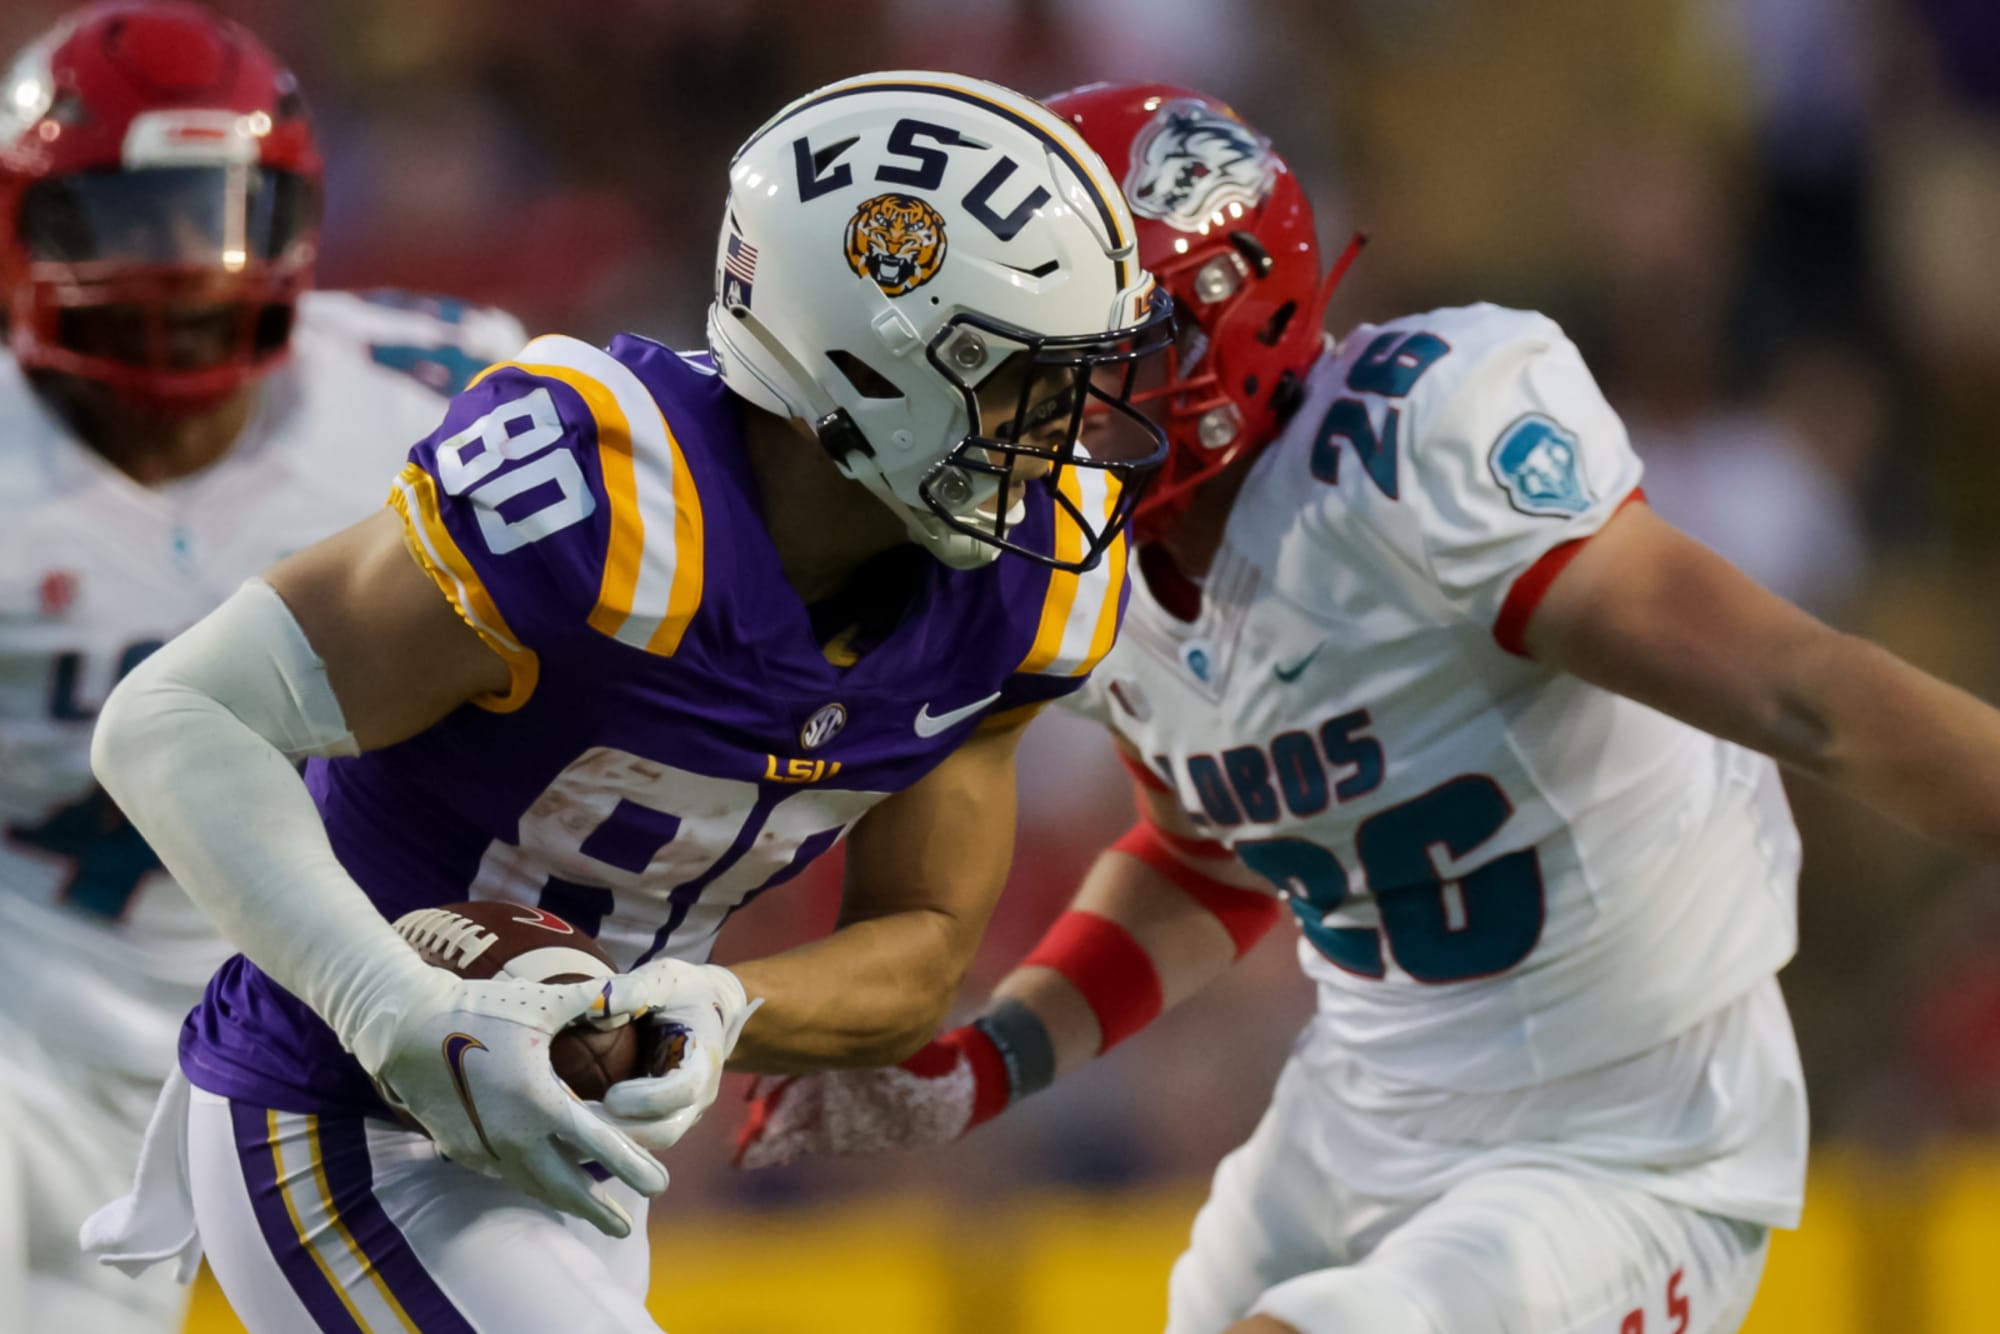 LSU football: Which players earned their stripes against New Mexico?